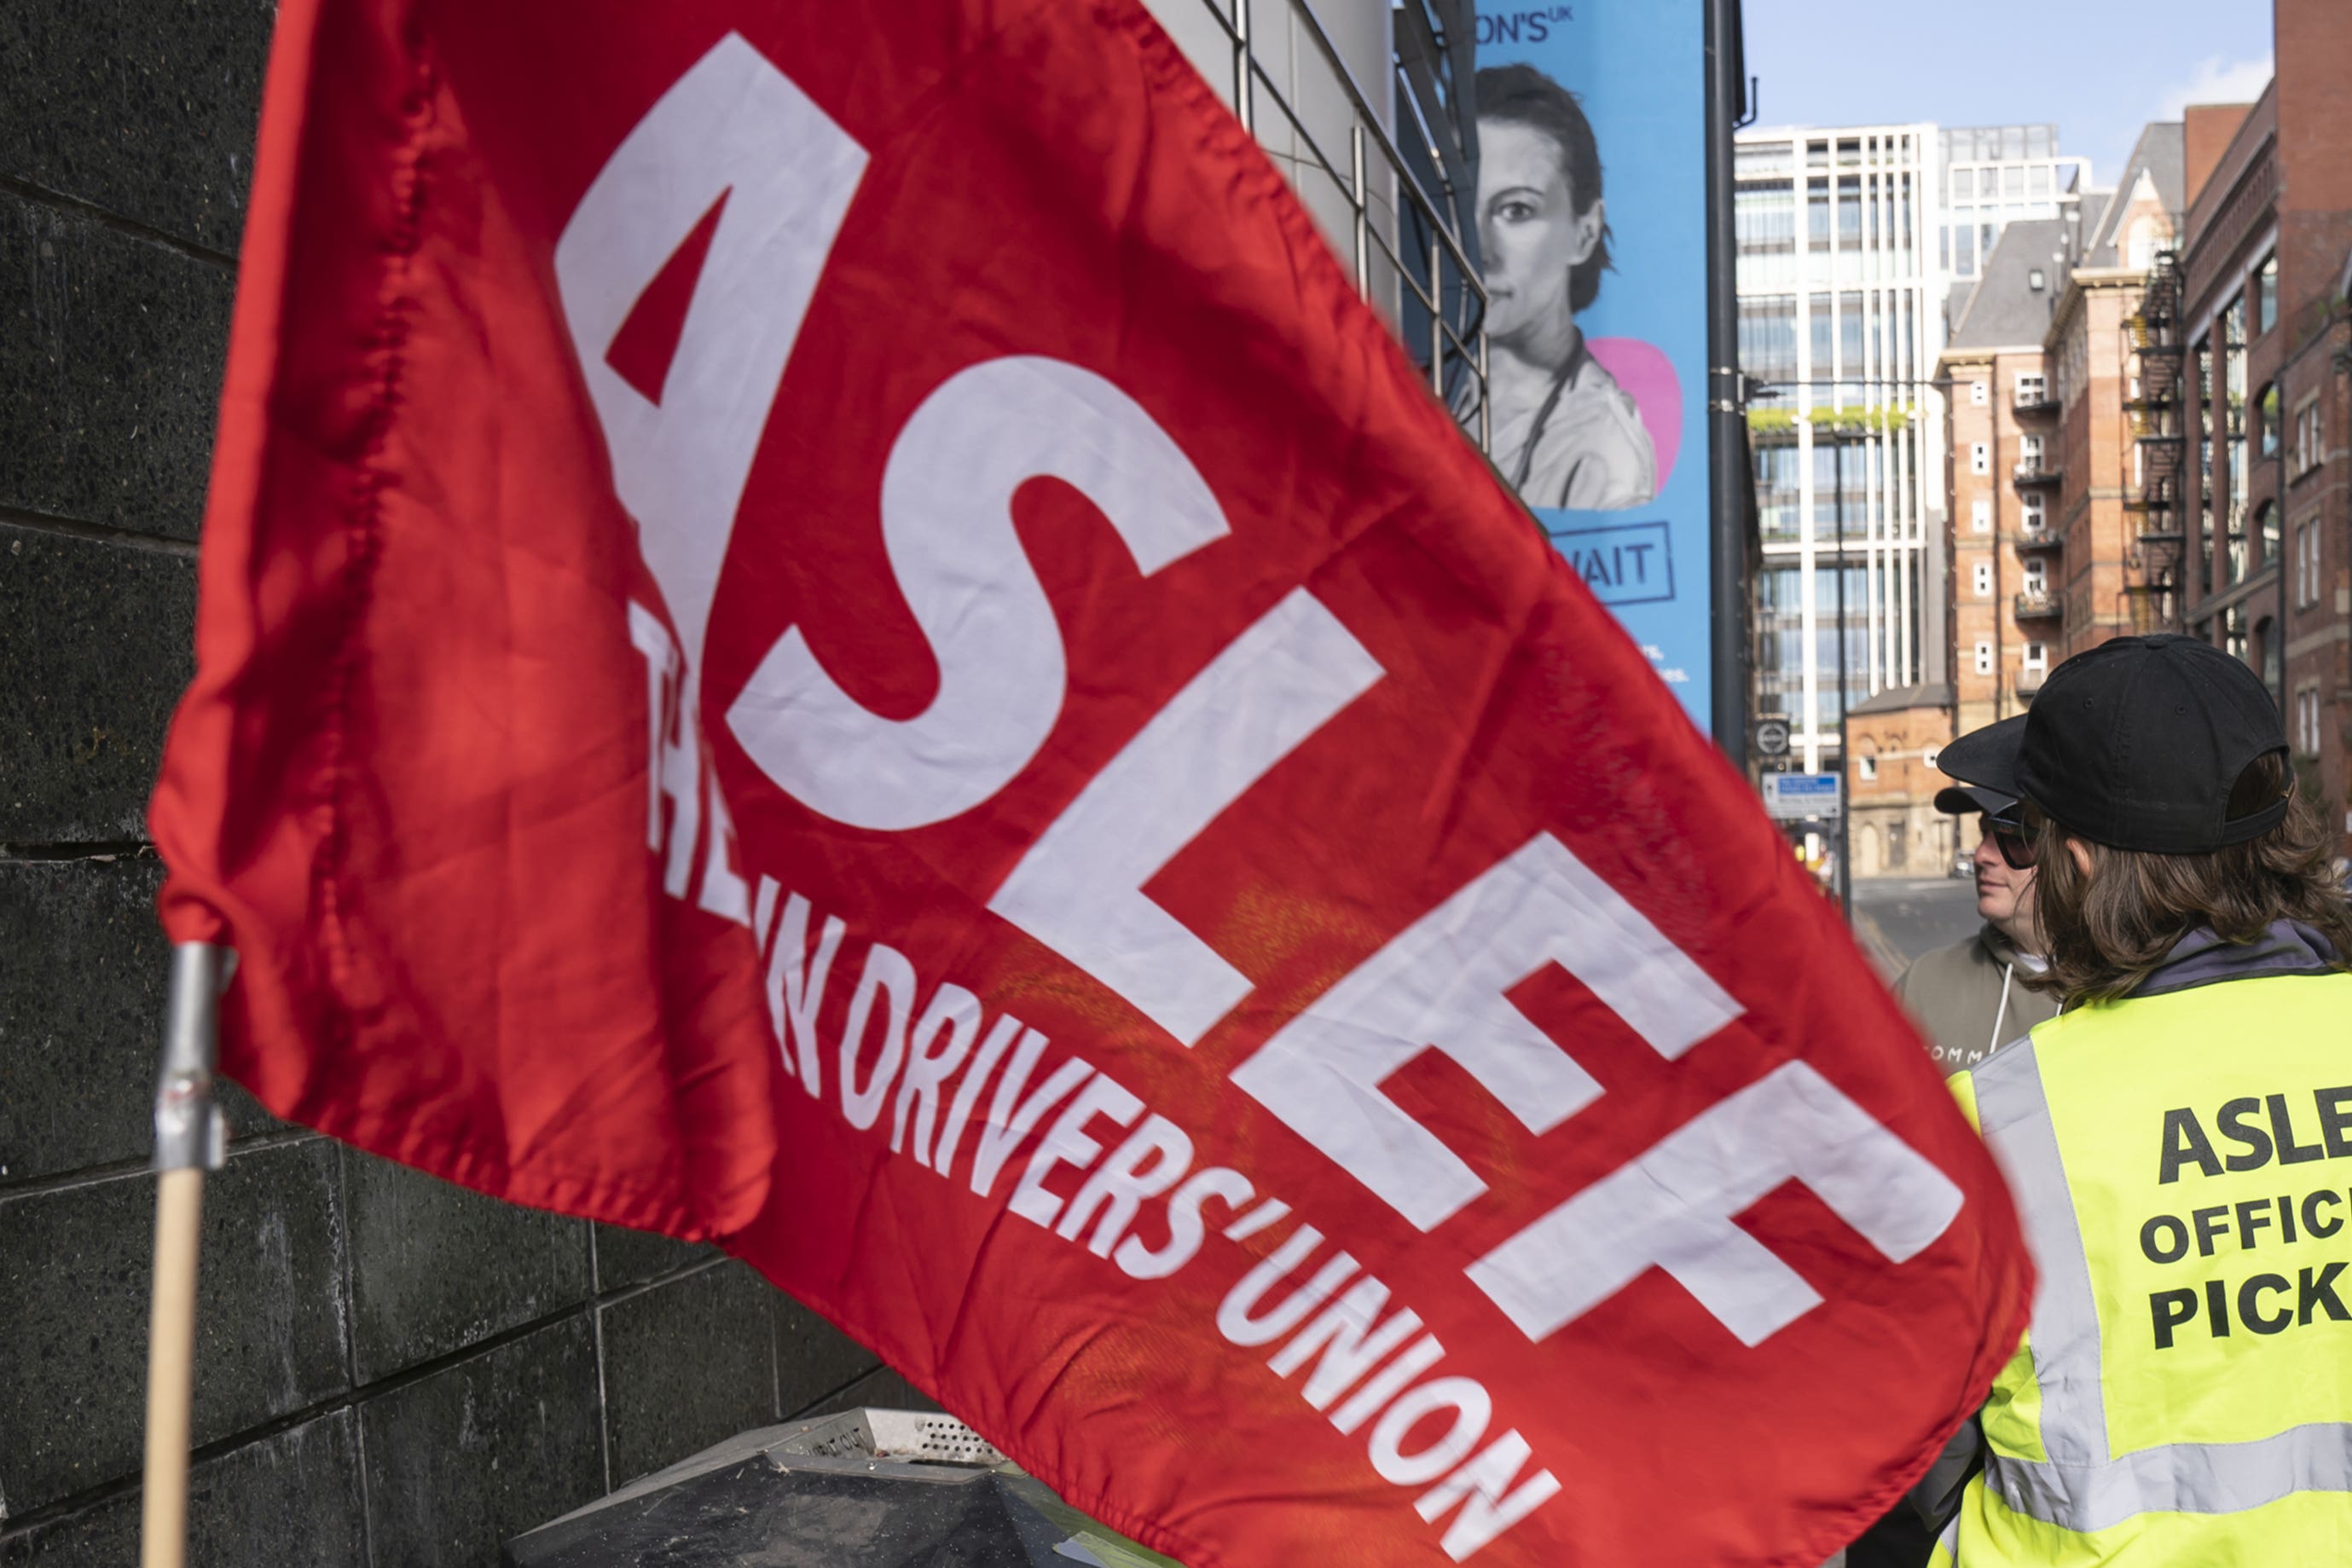 Members of the Aslef union at five rail operators have voted to continue strike action (Danny Lawson/PA)